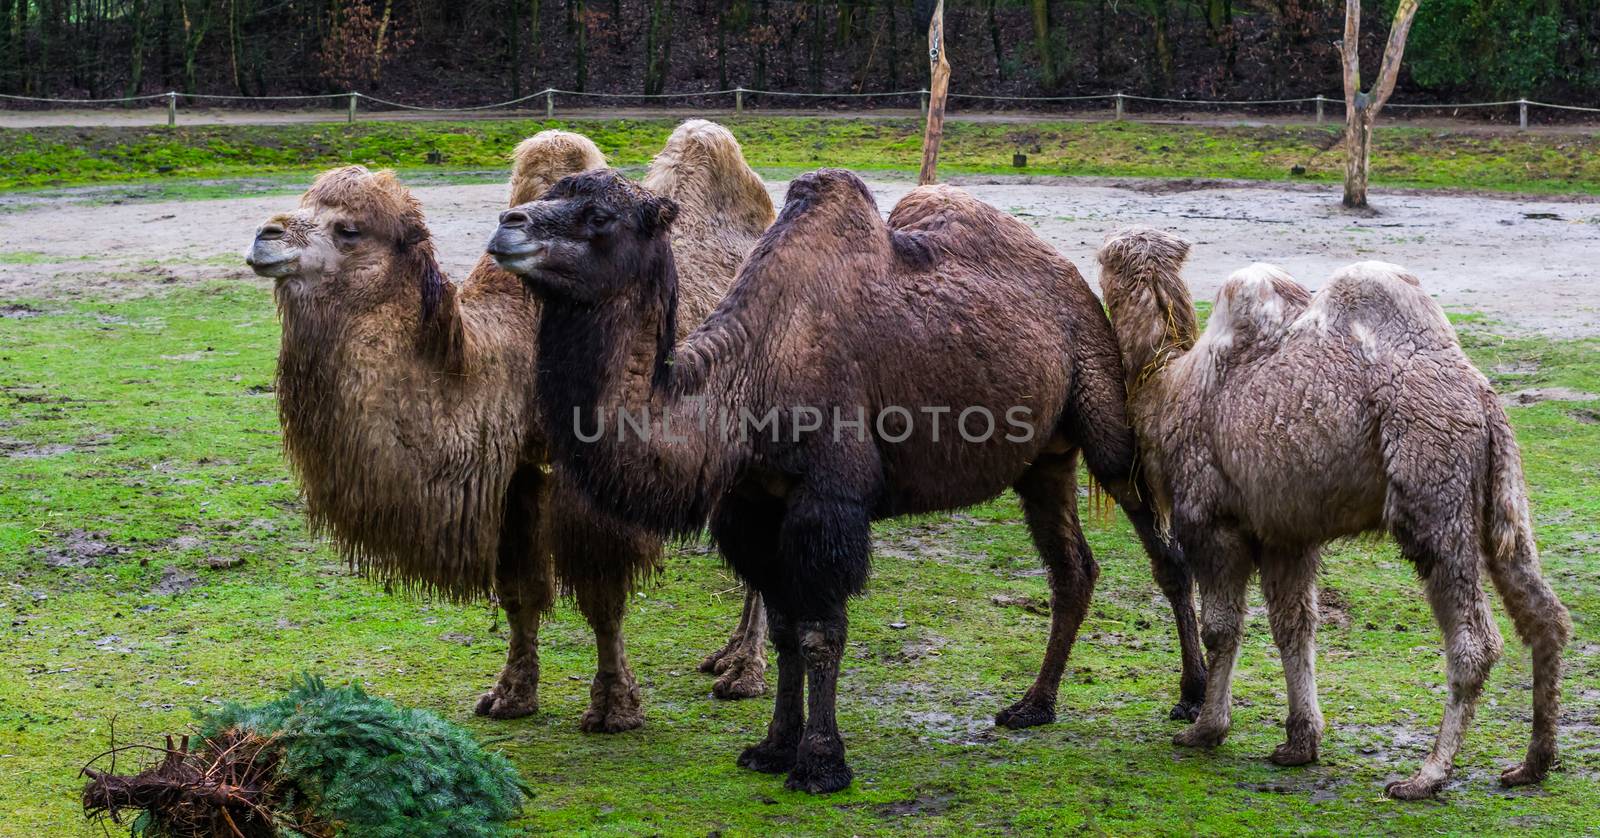 beautiful family portrait of bactrian camels in diverse colors, Domesticated animals from Asia